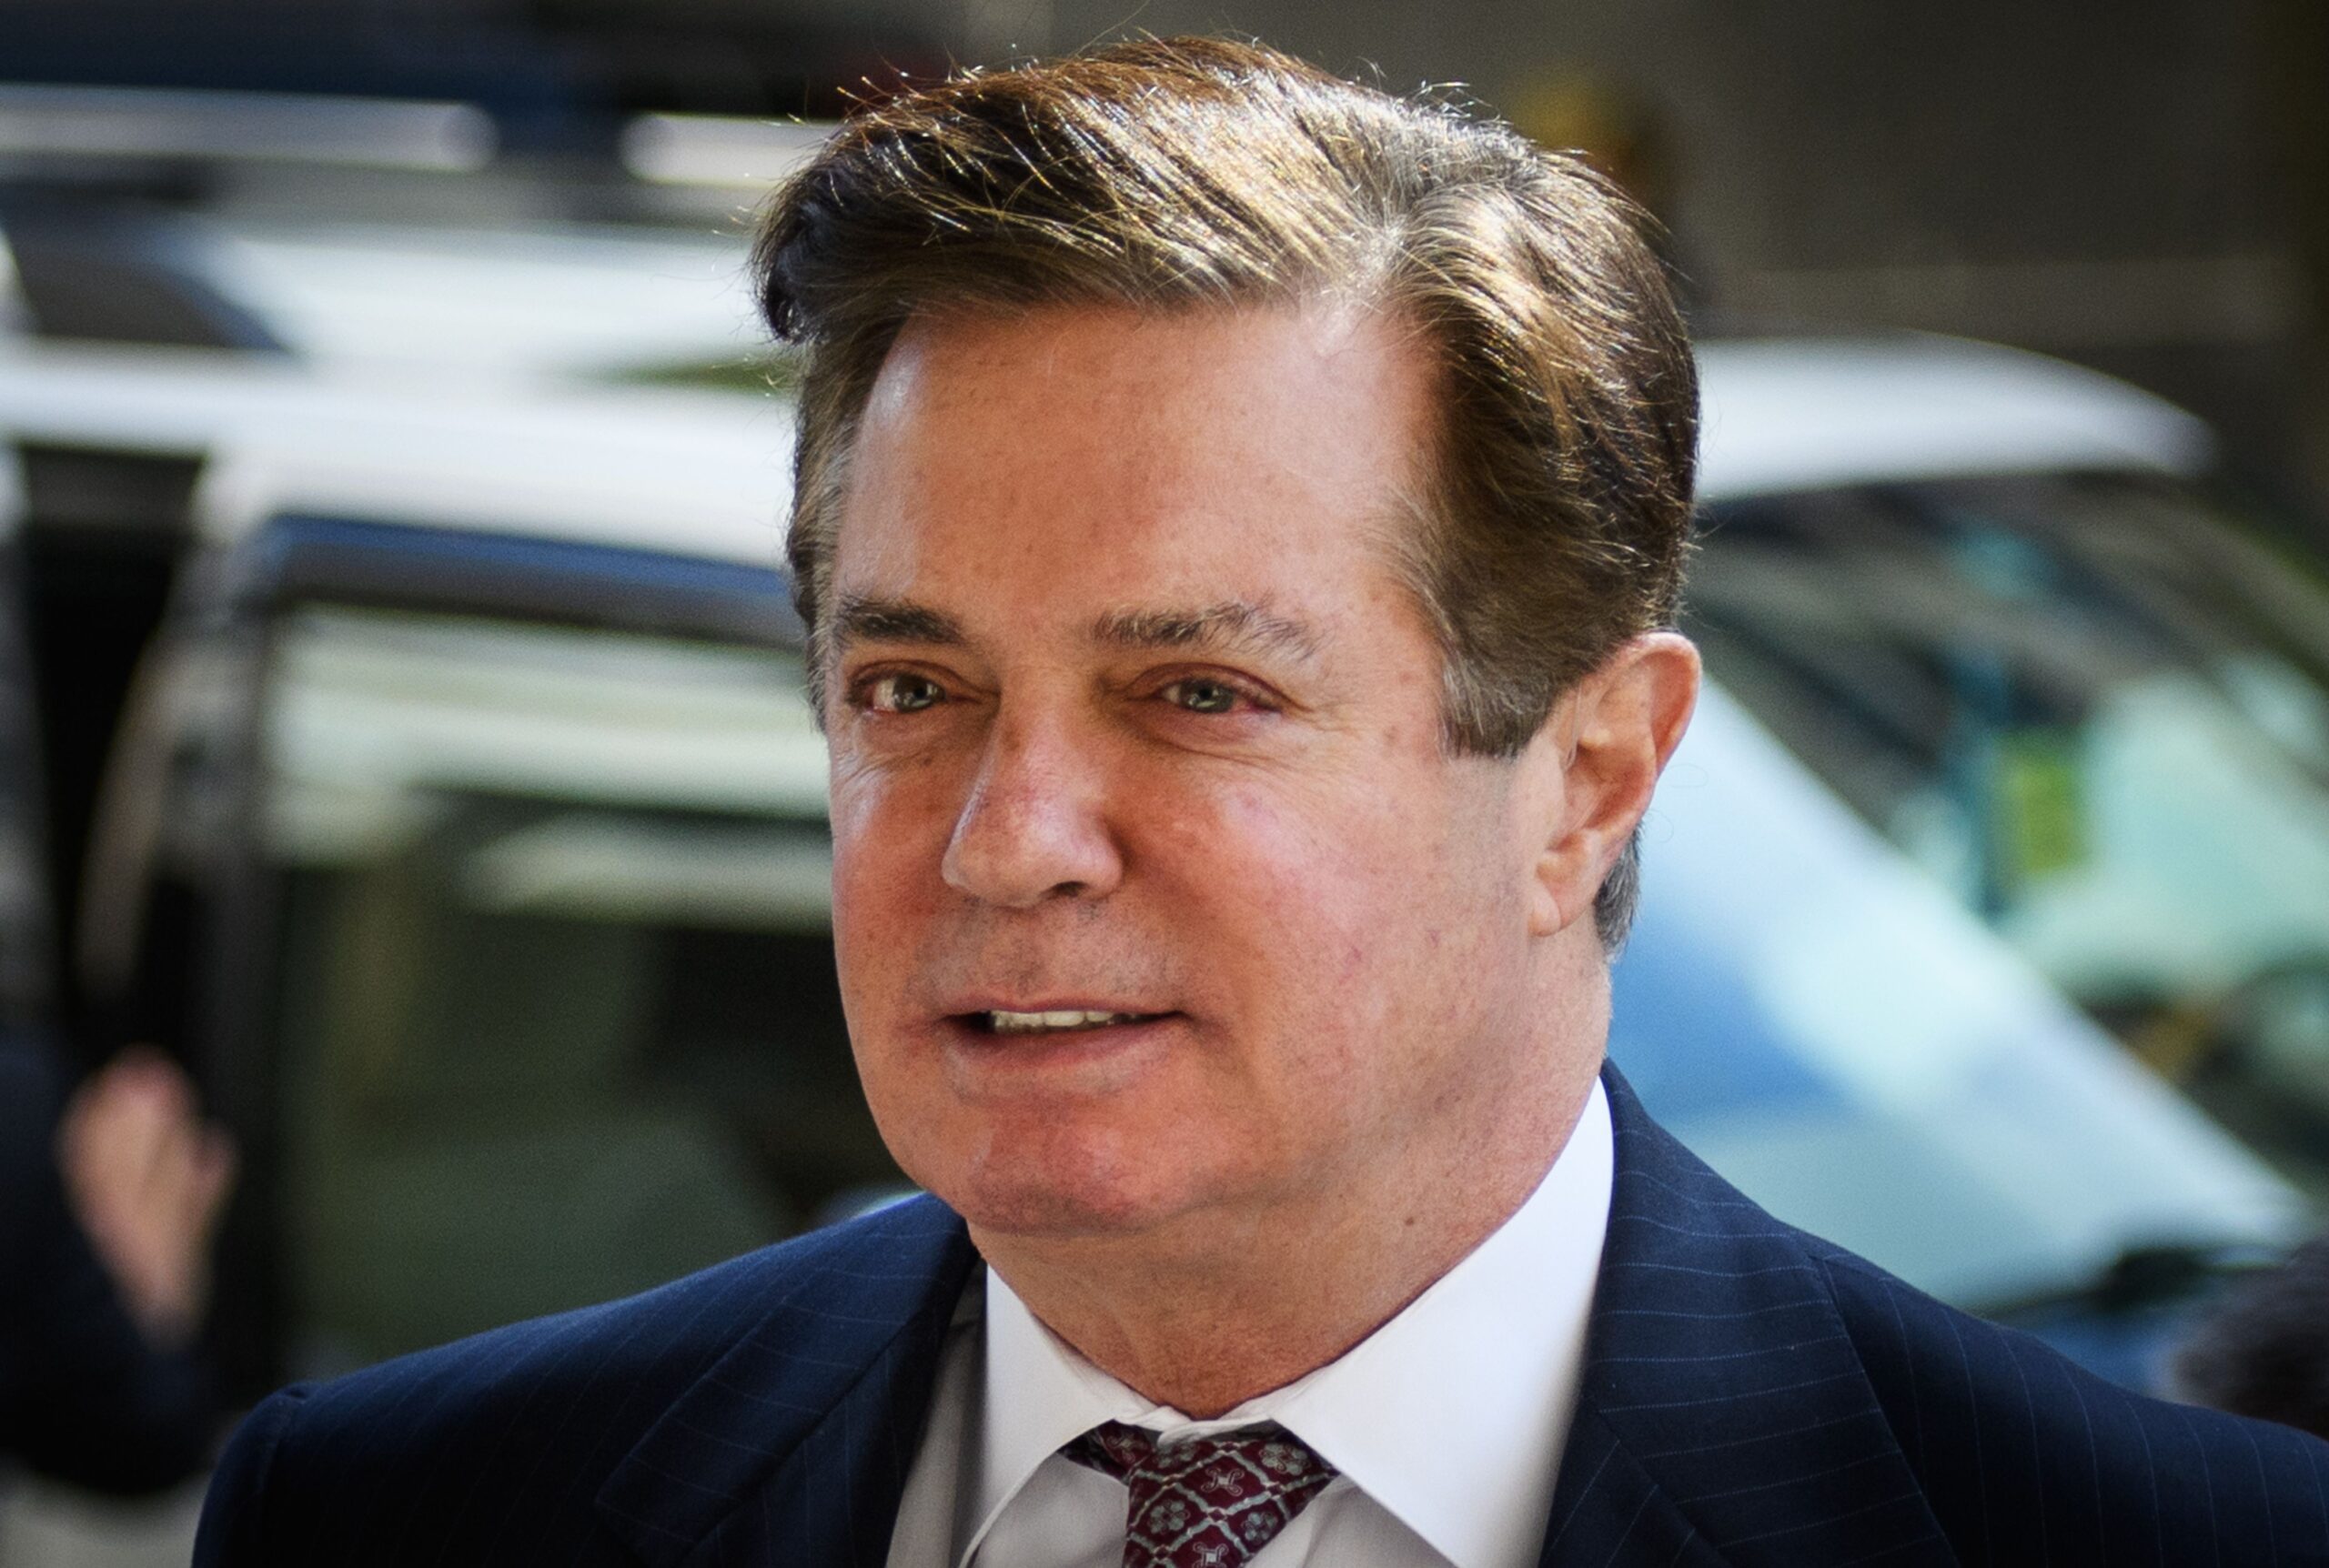 manafort-talks-about-solitary-confinement-in-exclusive-interview